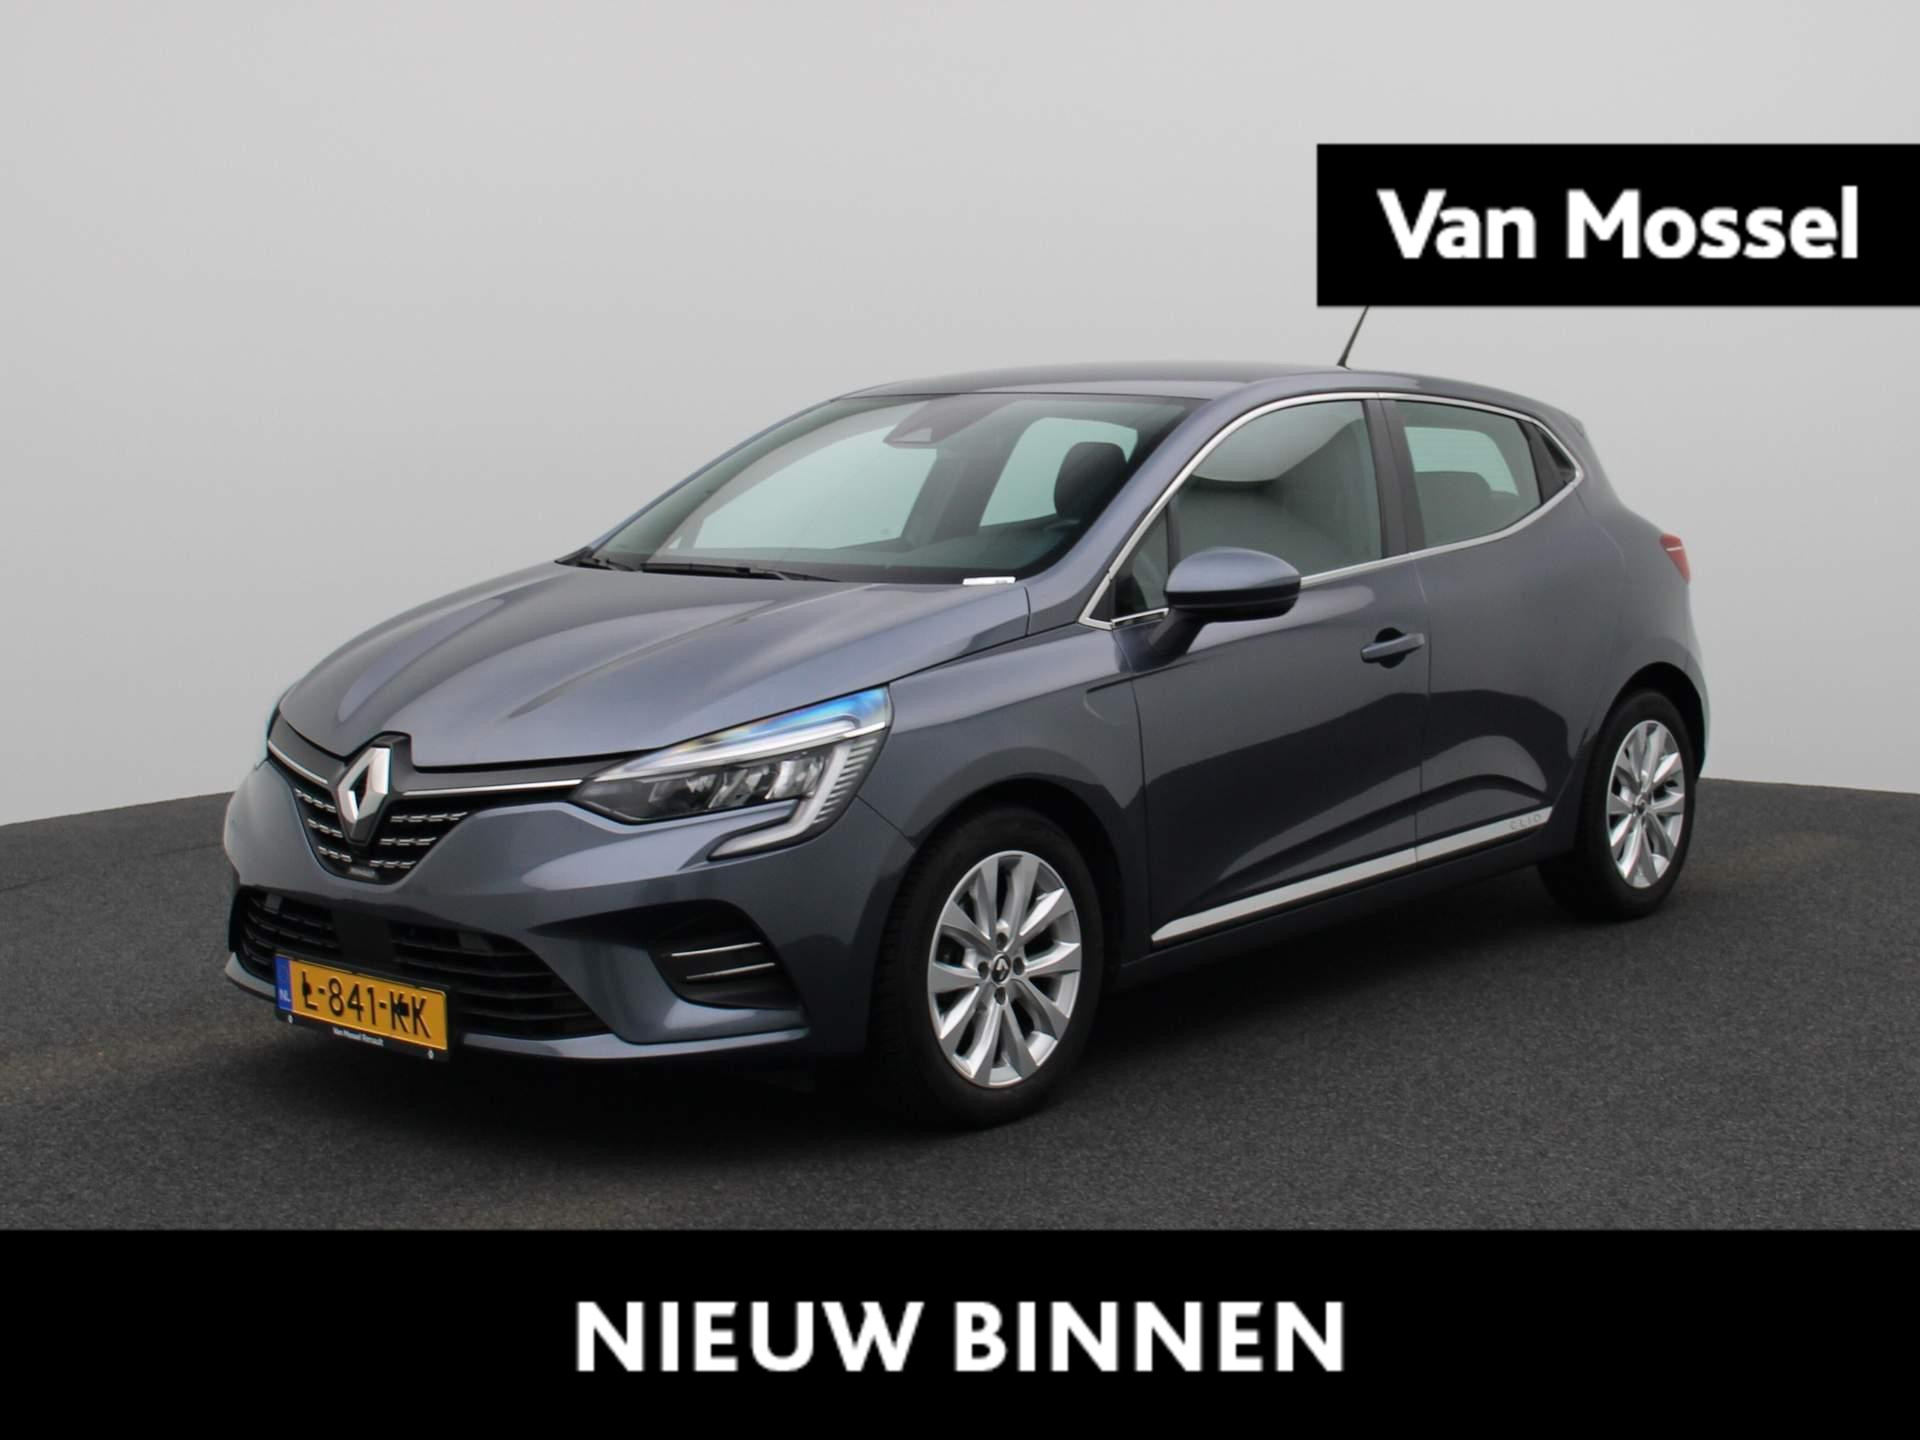 Renault Clio 1.0 TCe Intens | Pack EasyLink | Camera | PDC Voor+Achter | Keyless | LED Pure Vision | 16" LMV | Climate Control | Apple Carplay & Android Auto